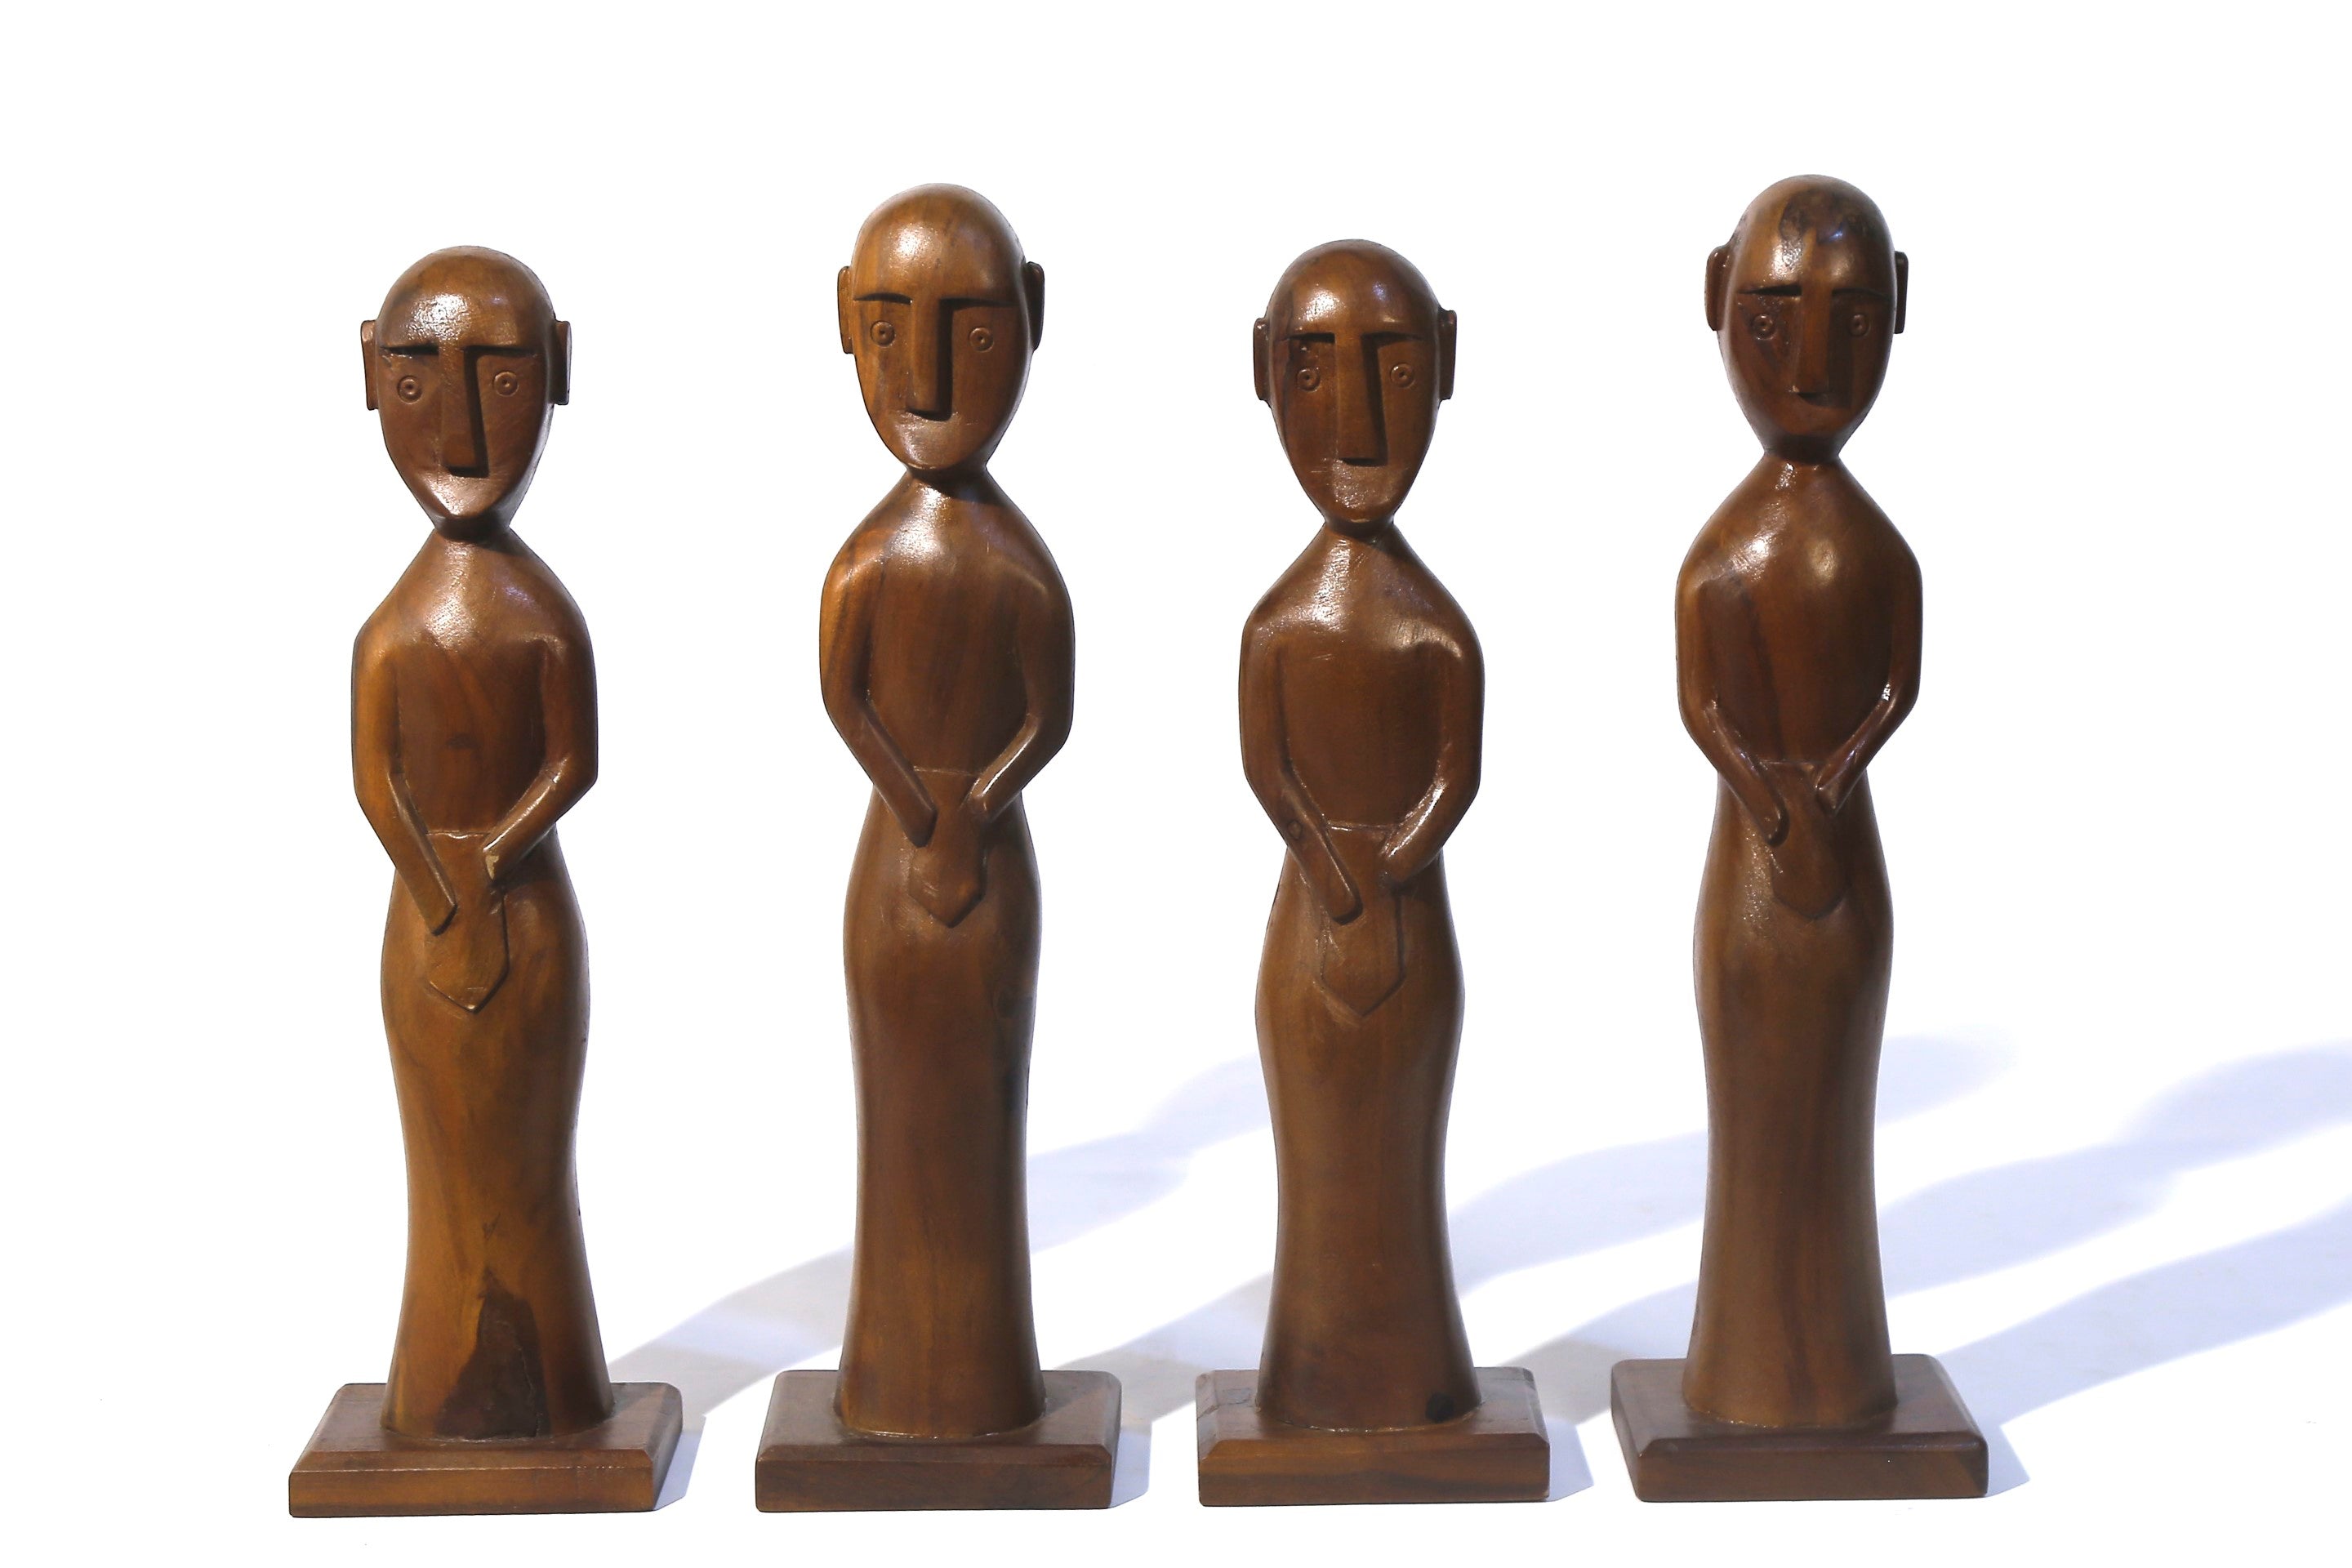 (Set of 4) Artistic Wooden Figurine Traditional Décor